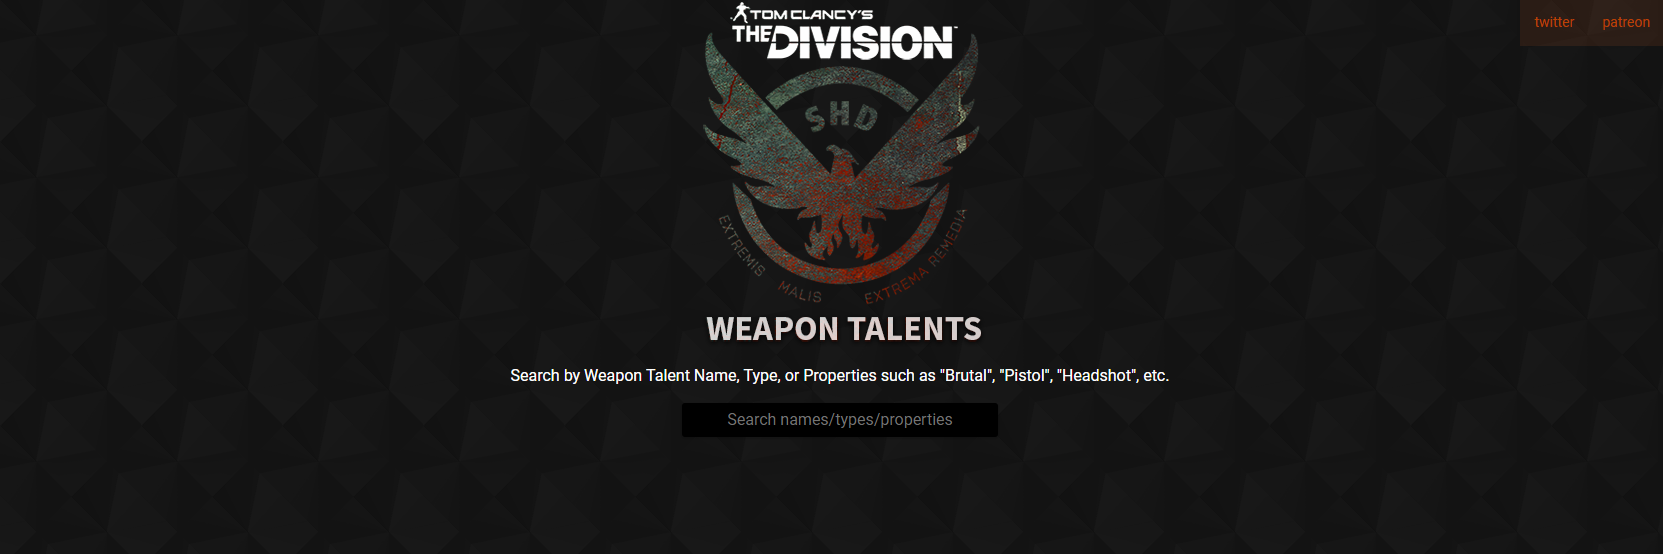 The Division Weapon Talents web app